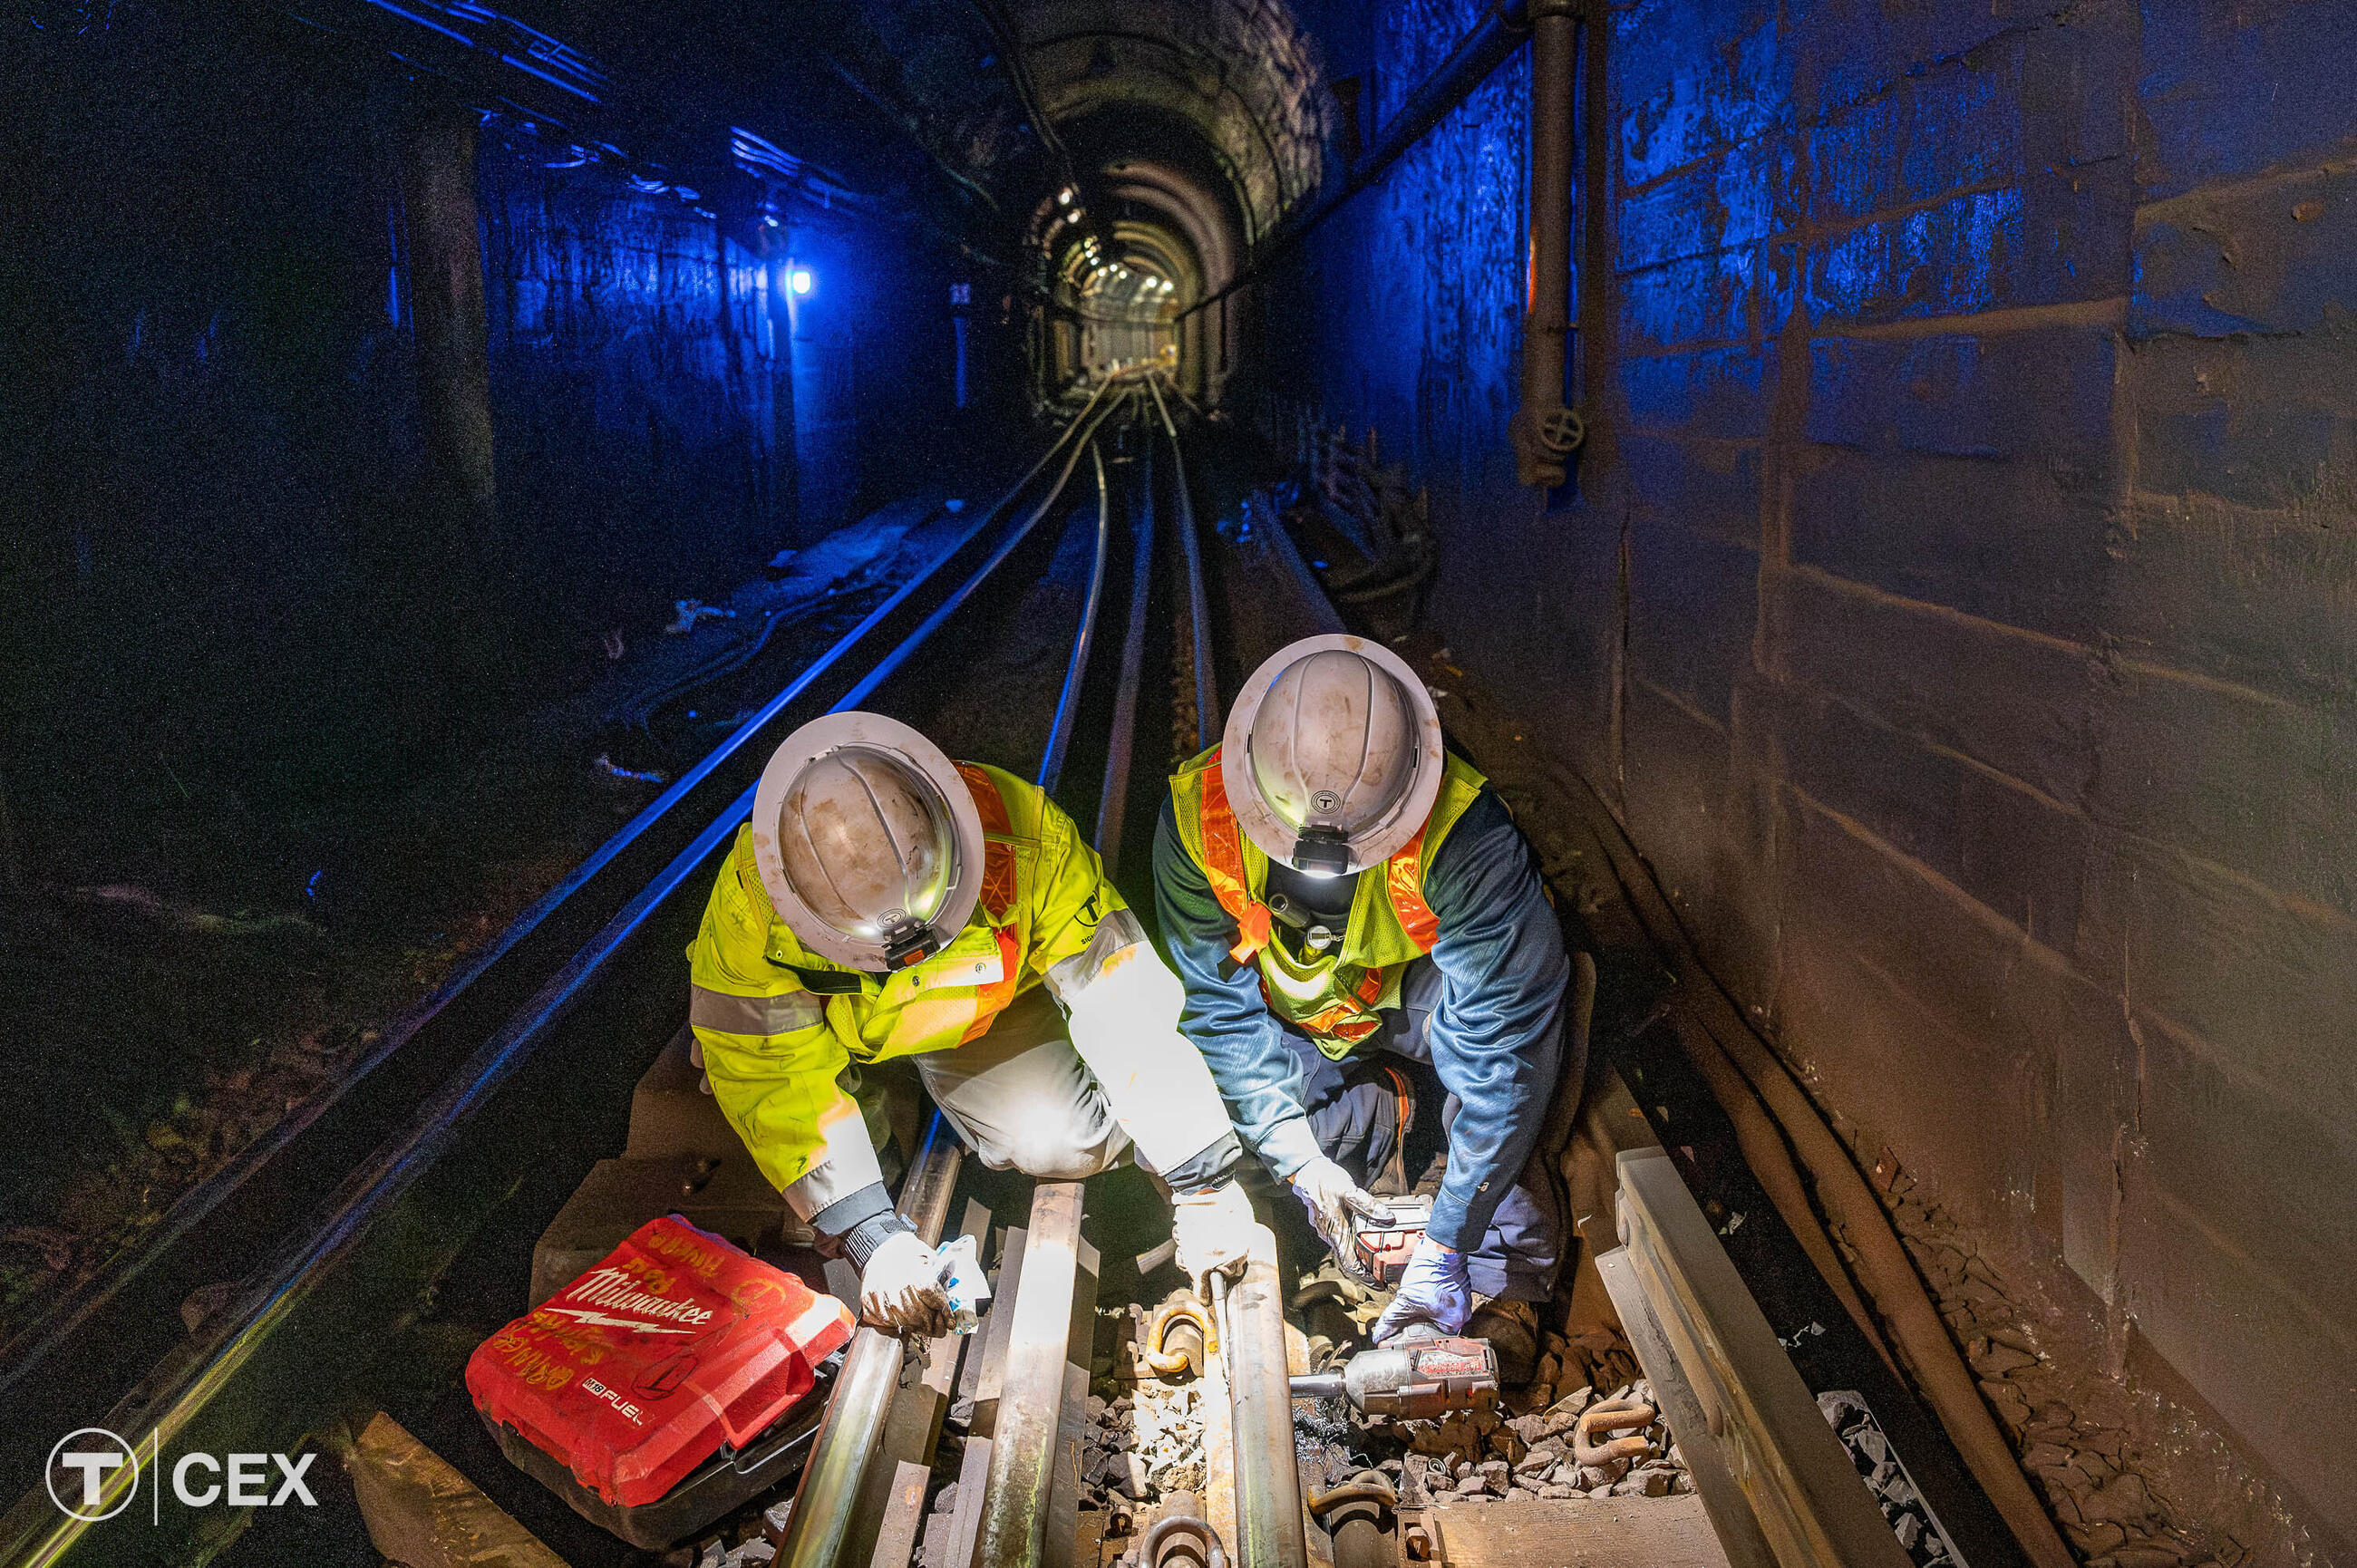 Crews performed track work in the underground tunnel of the Orange Line. Complimentary photo by the MBTA Customer and Employee Experience Department.